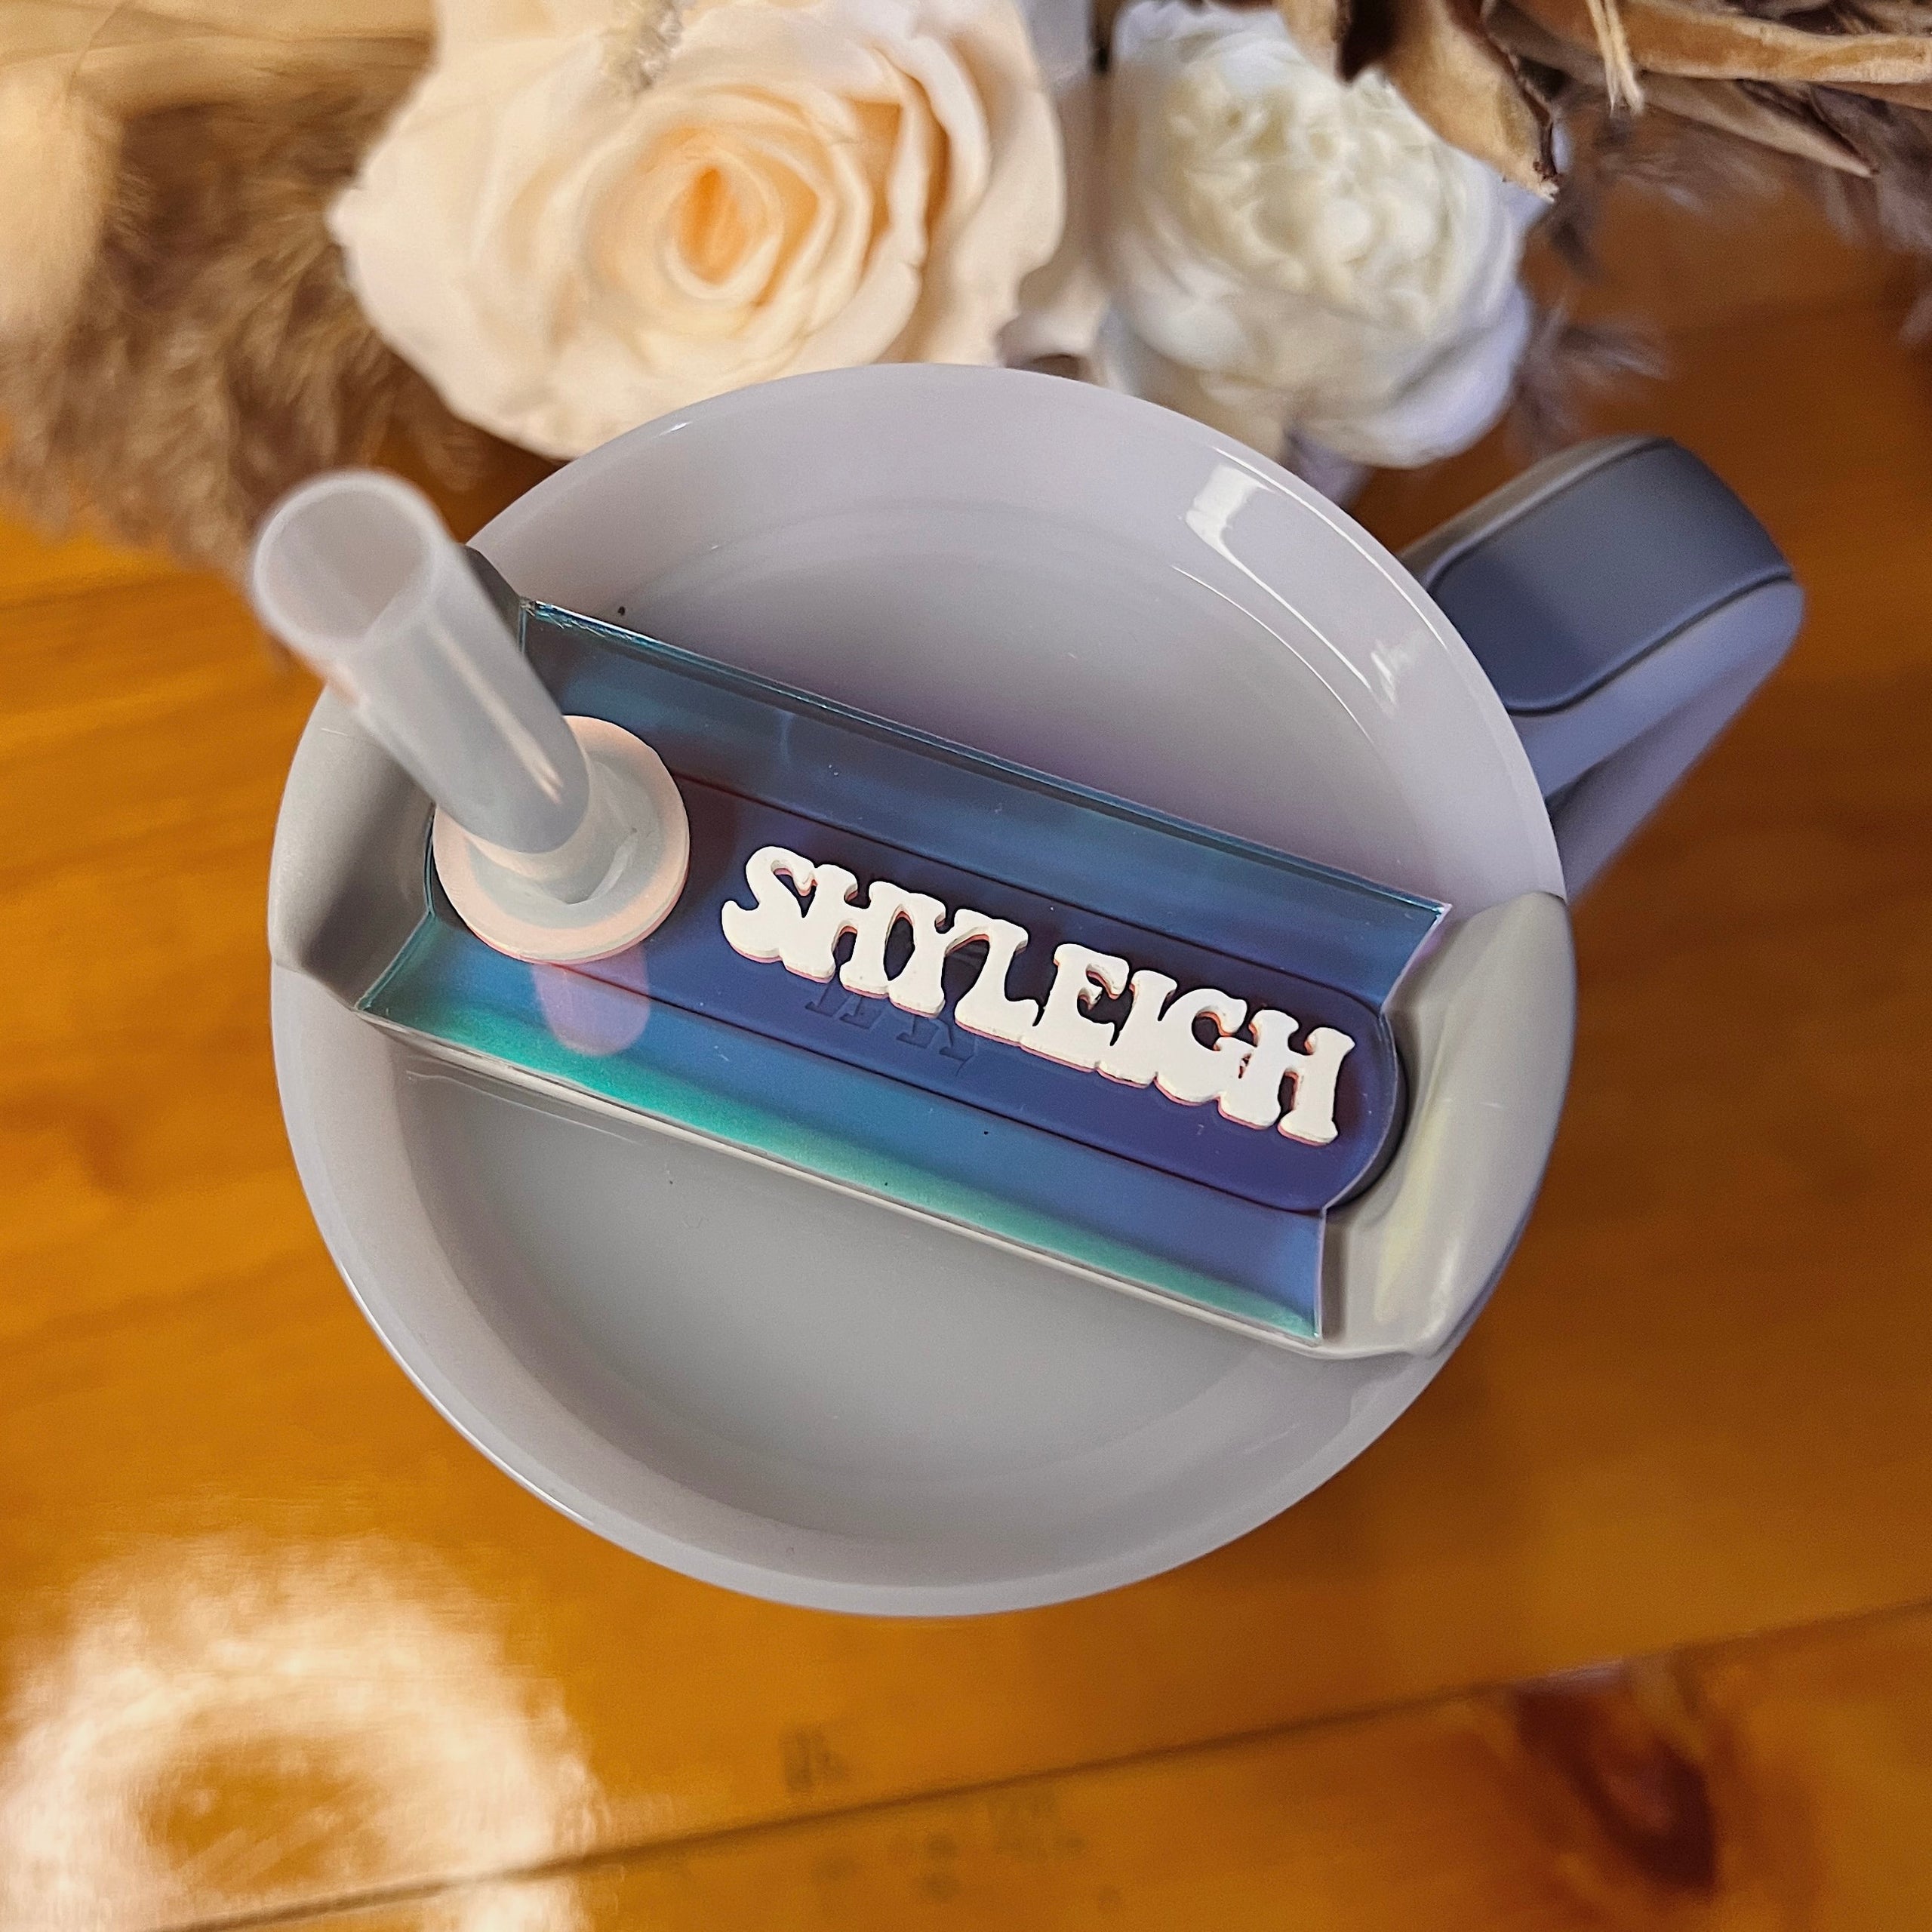 stanley cup name plate｜TikTok Search